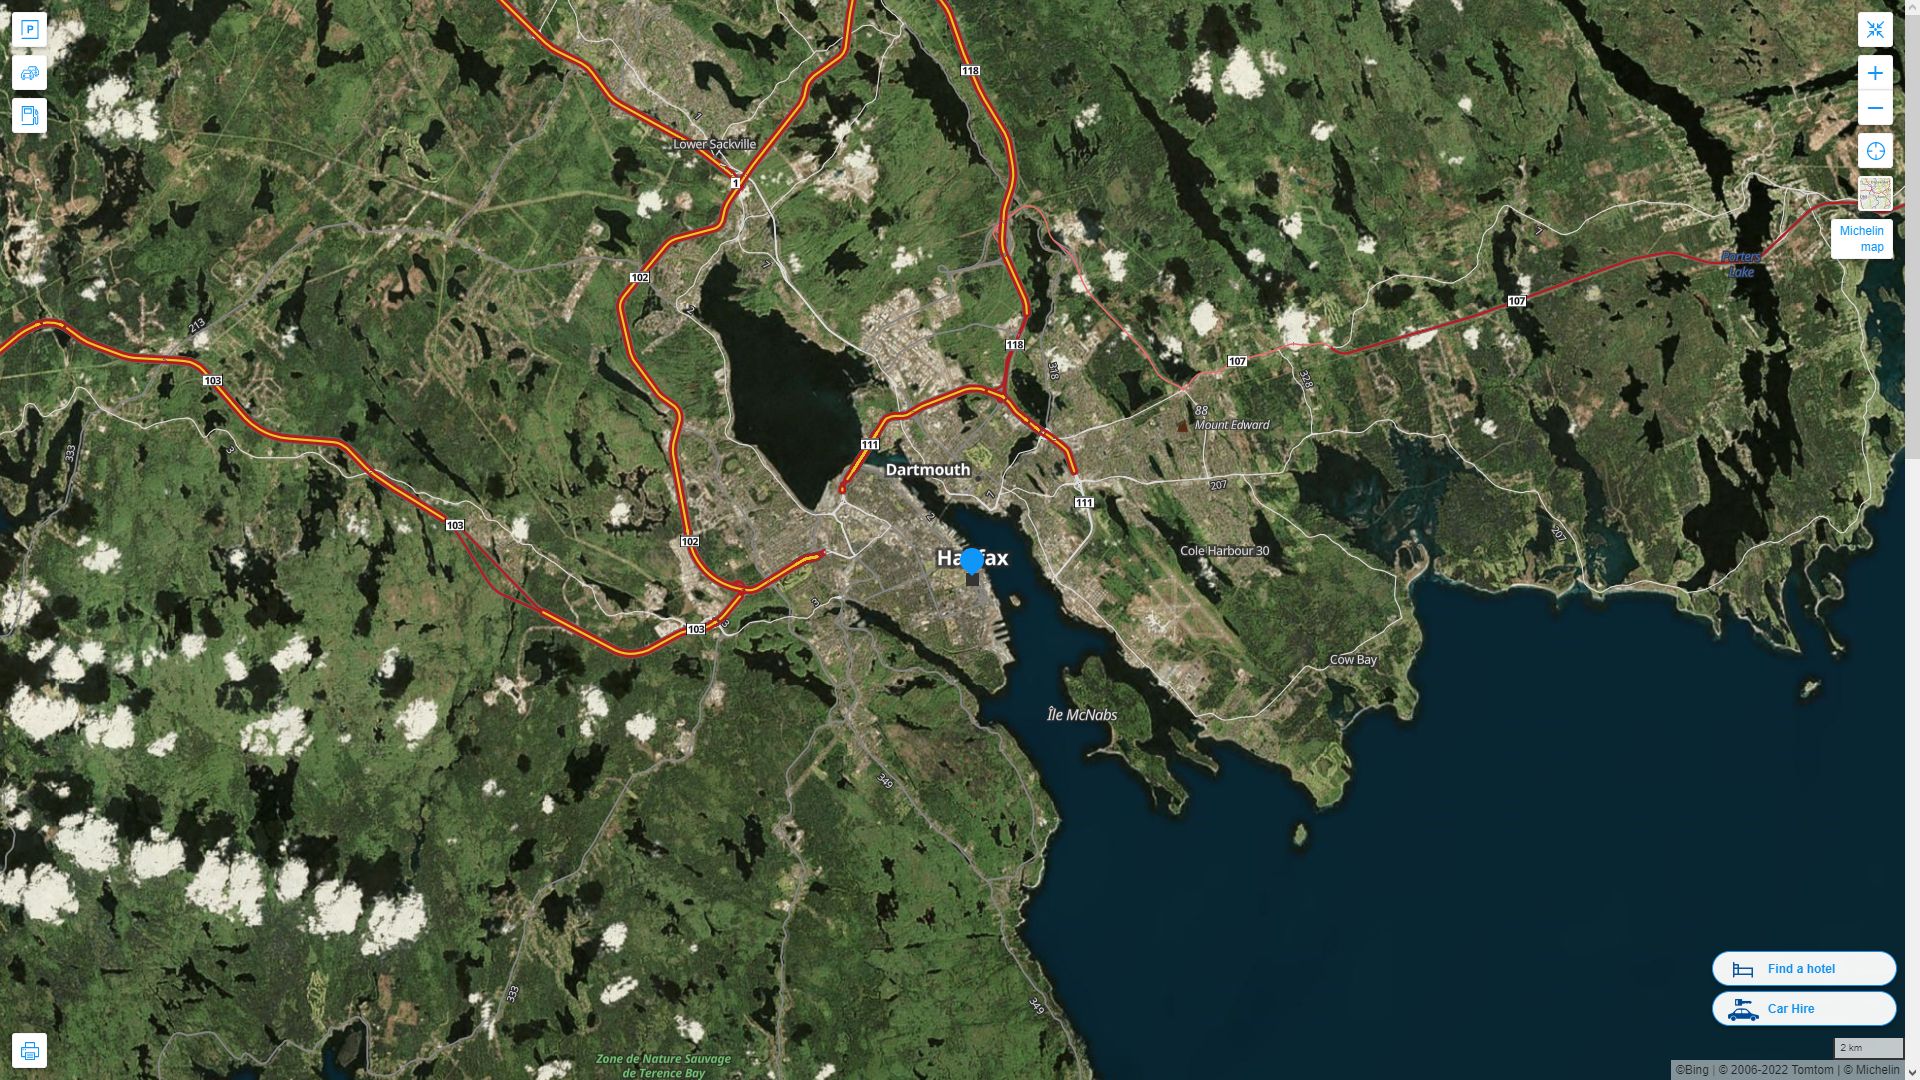 Halifax Highway and Road Map with Satellite View